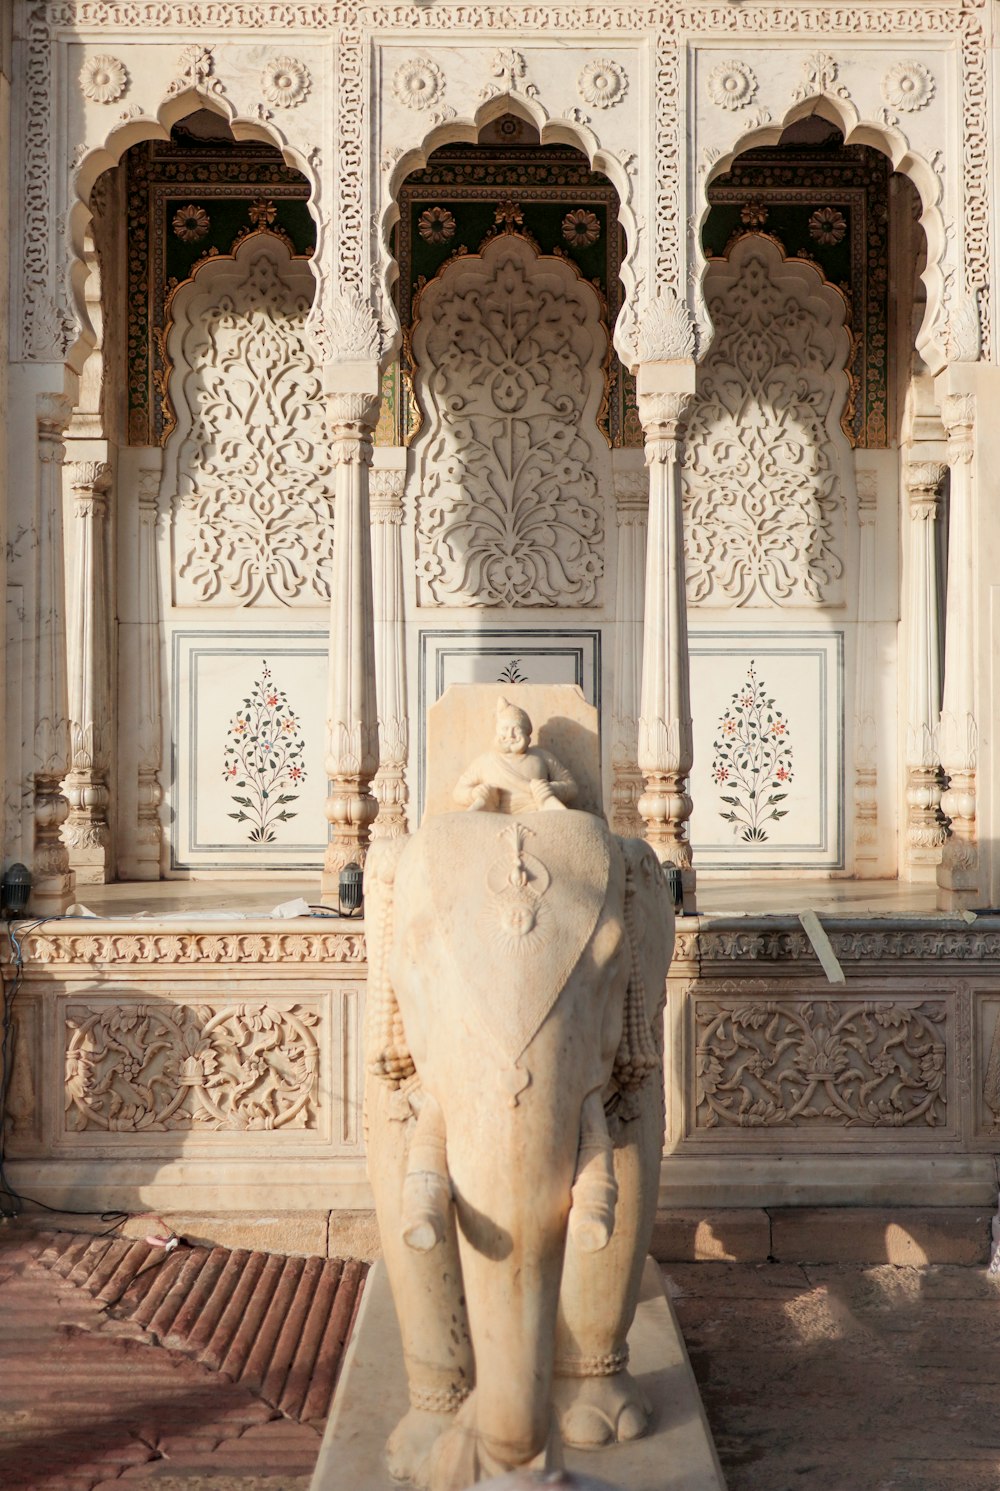 a statue of an elephant in front of a building